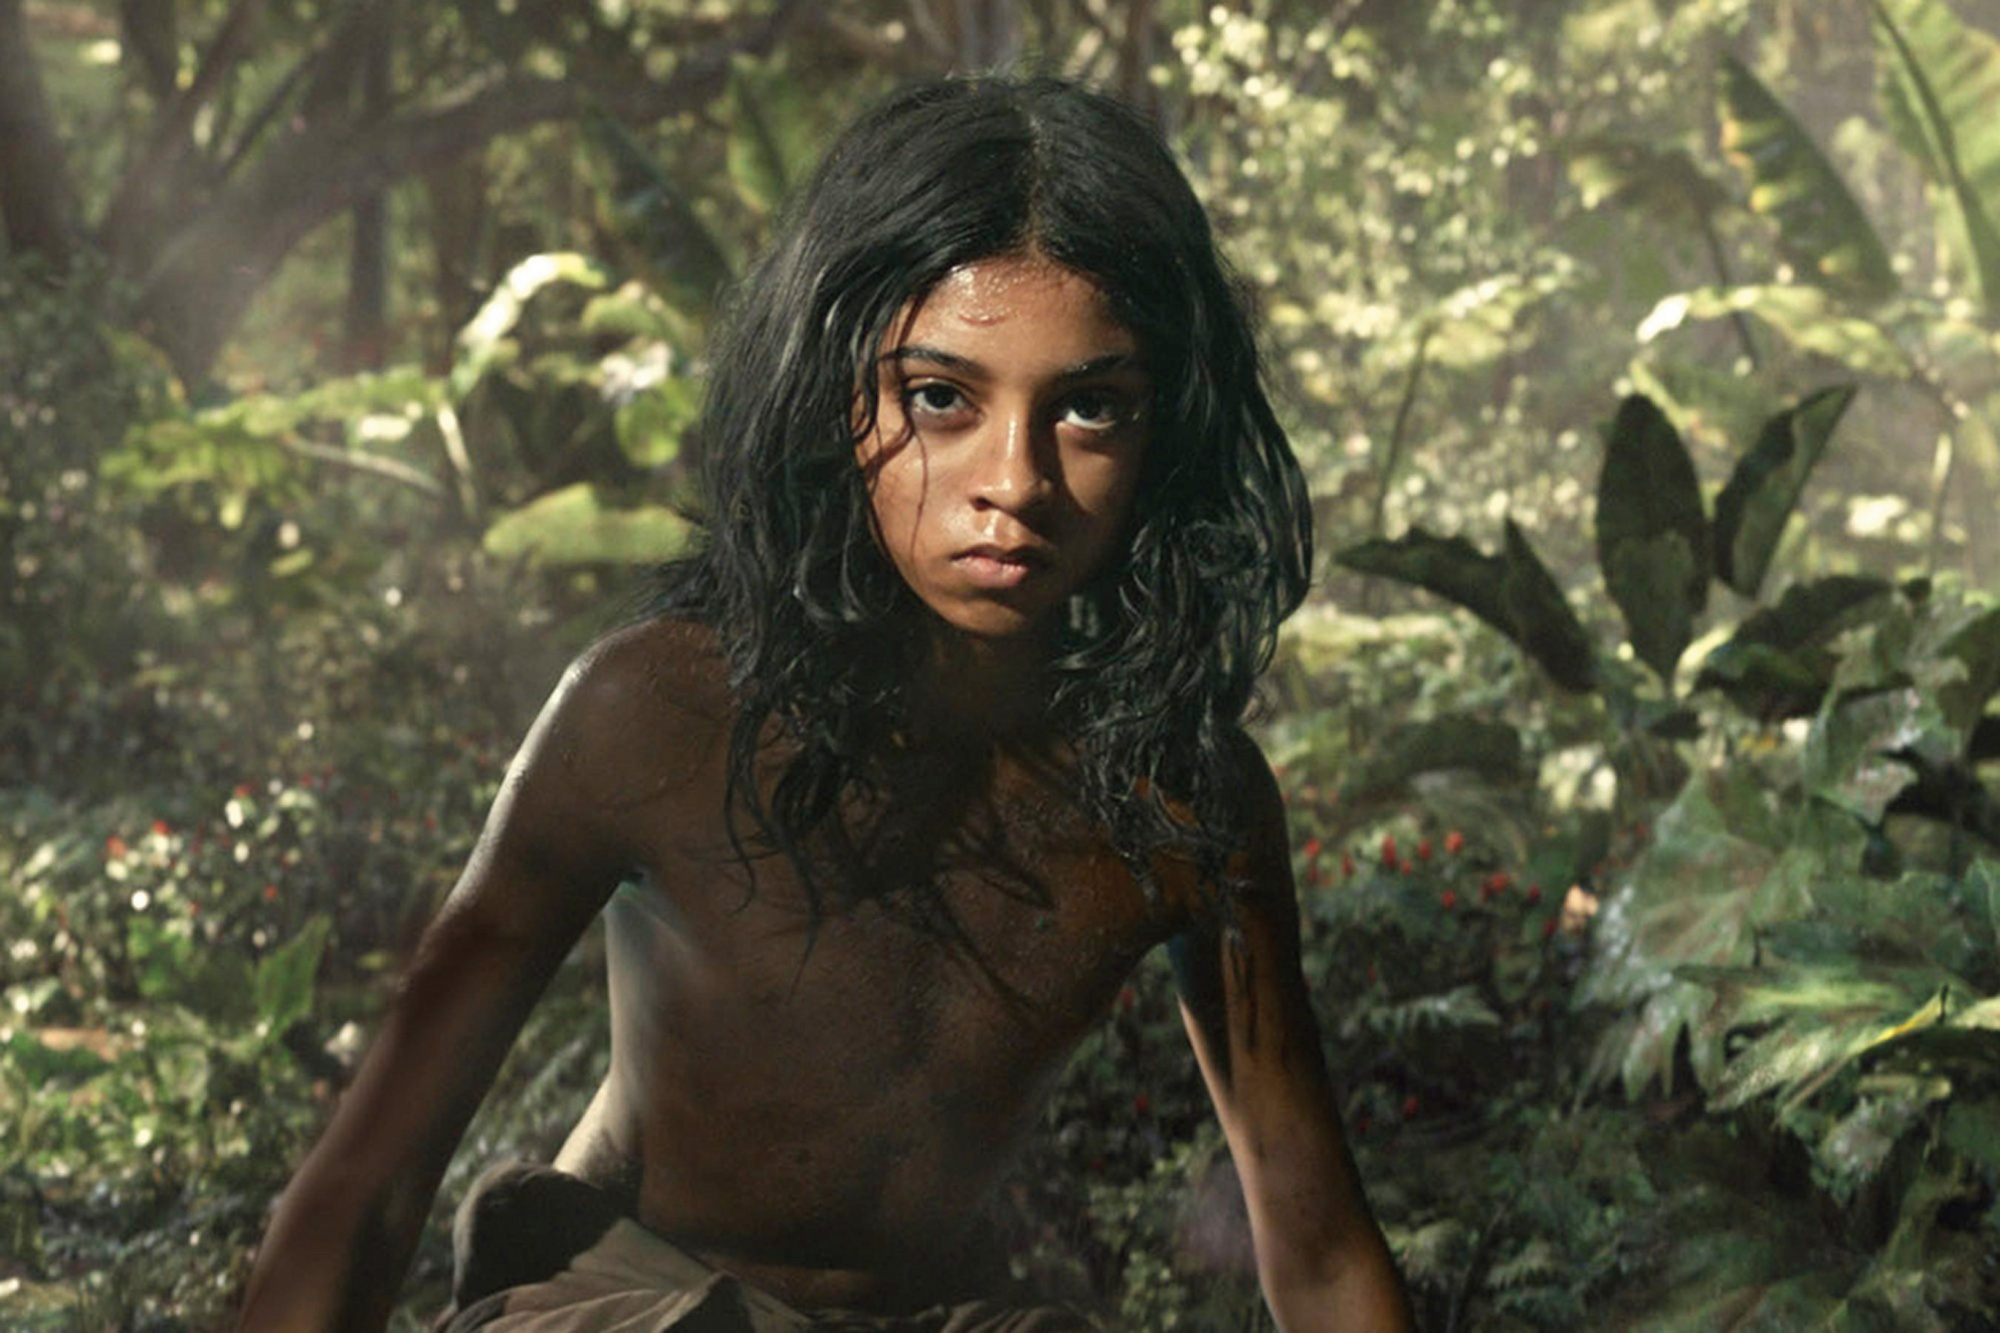 Rohan Chand on playing the boy hero in Mowgli and working with a ‘bucket list of stars’